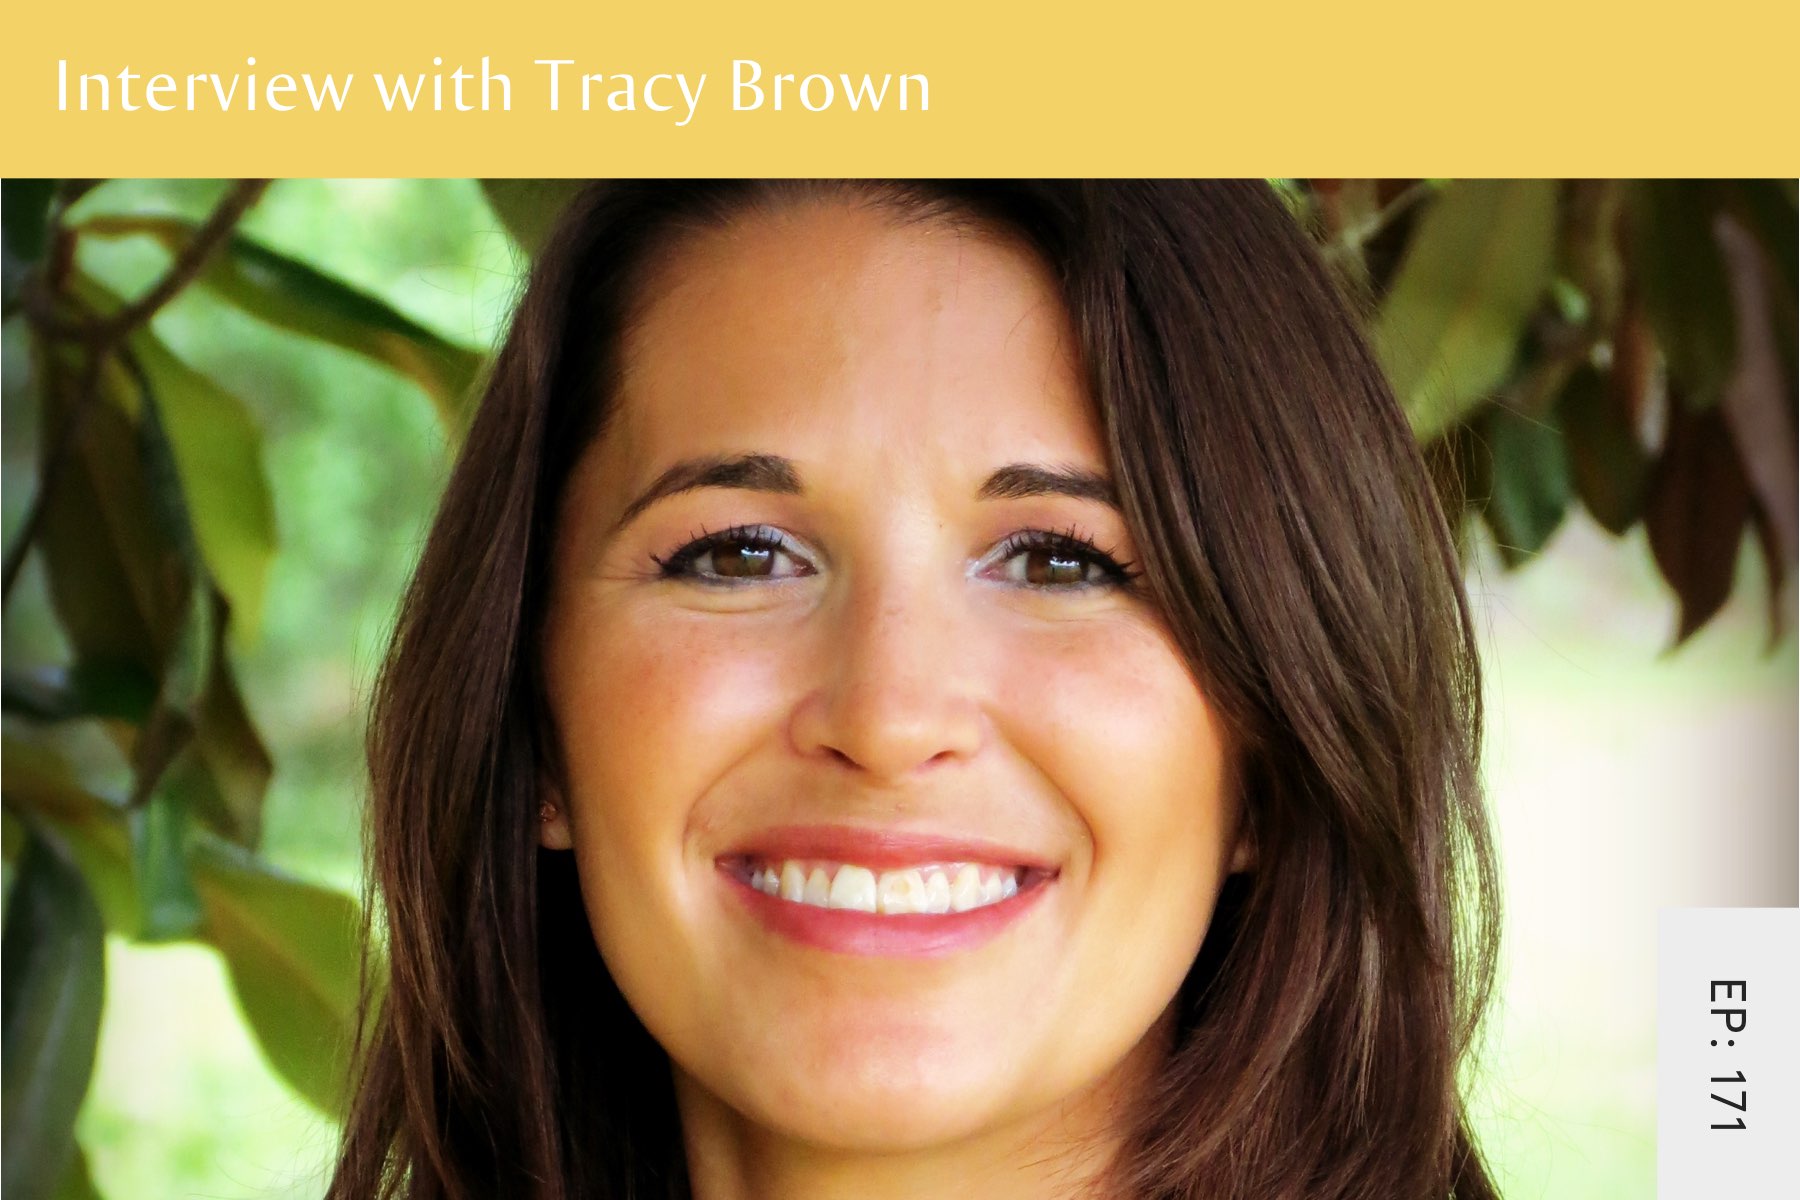 171: Interview With Tracy Brown - Seven Health: Eating Disorder Recovery and Anti Diet Nutritionist